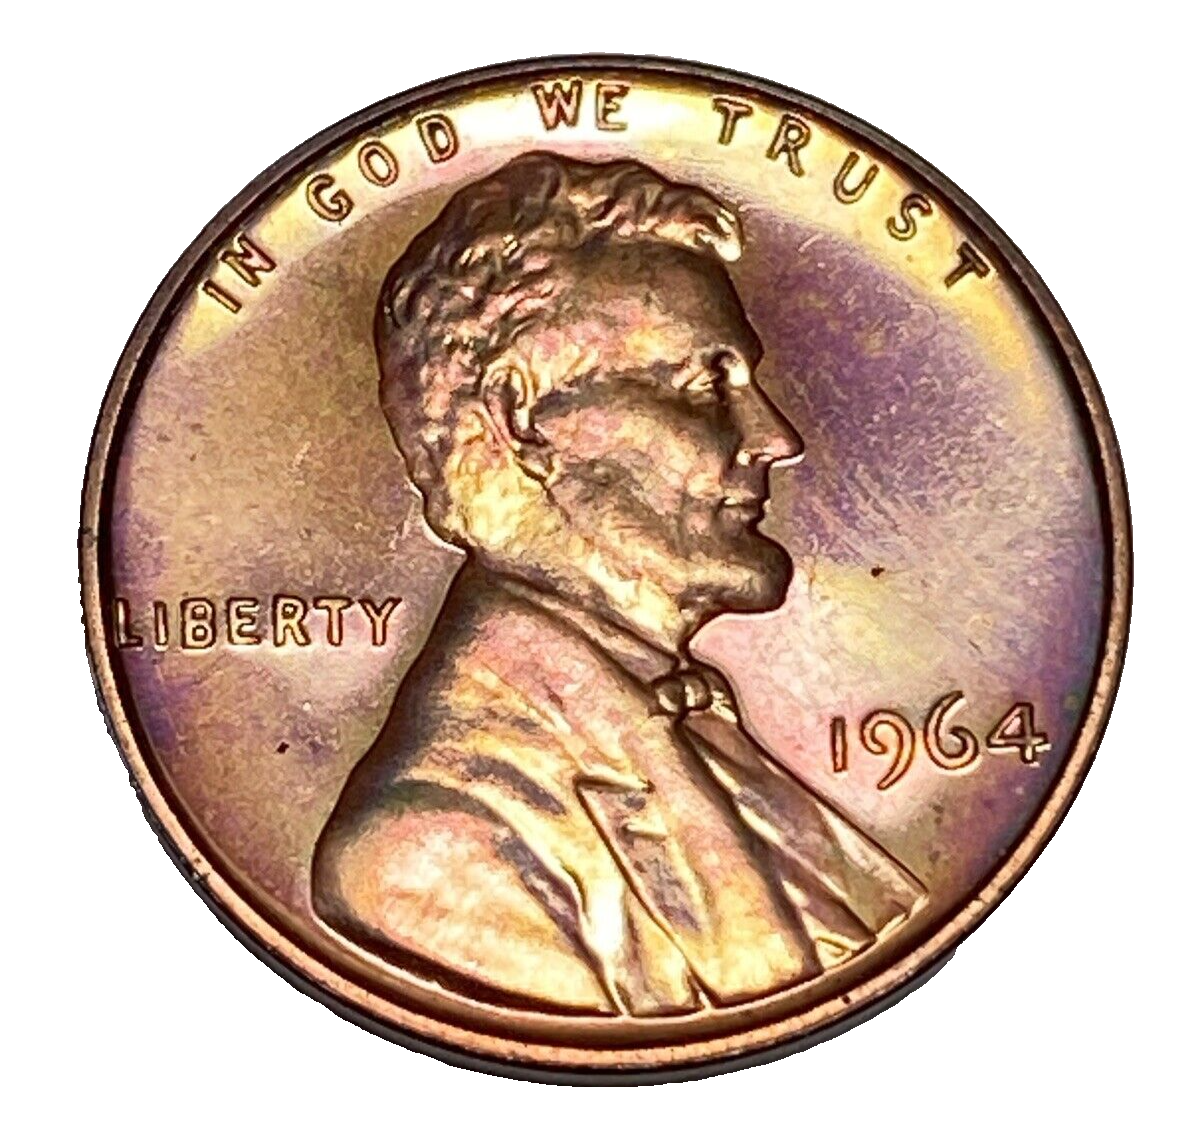 Primary image for 1964 Proof Lincoln Memorial Cent-Uncirculated Details With Toning-US Coin Penny